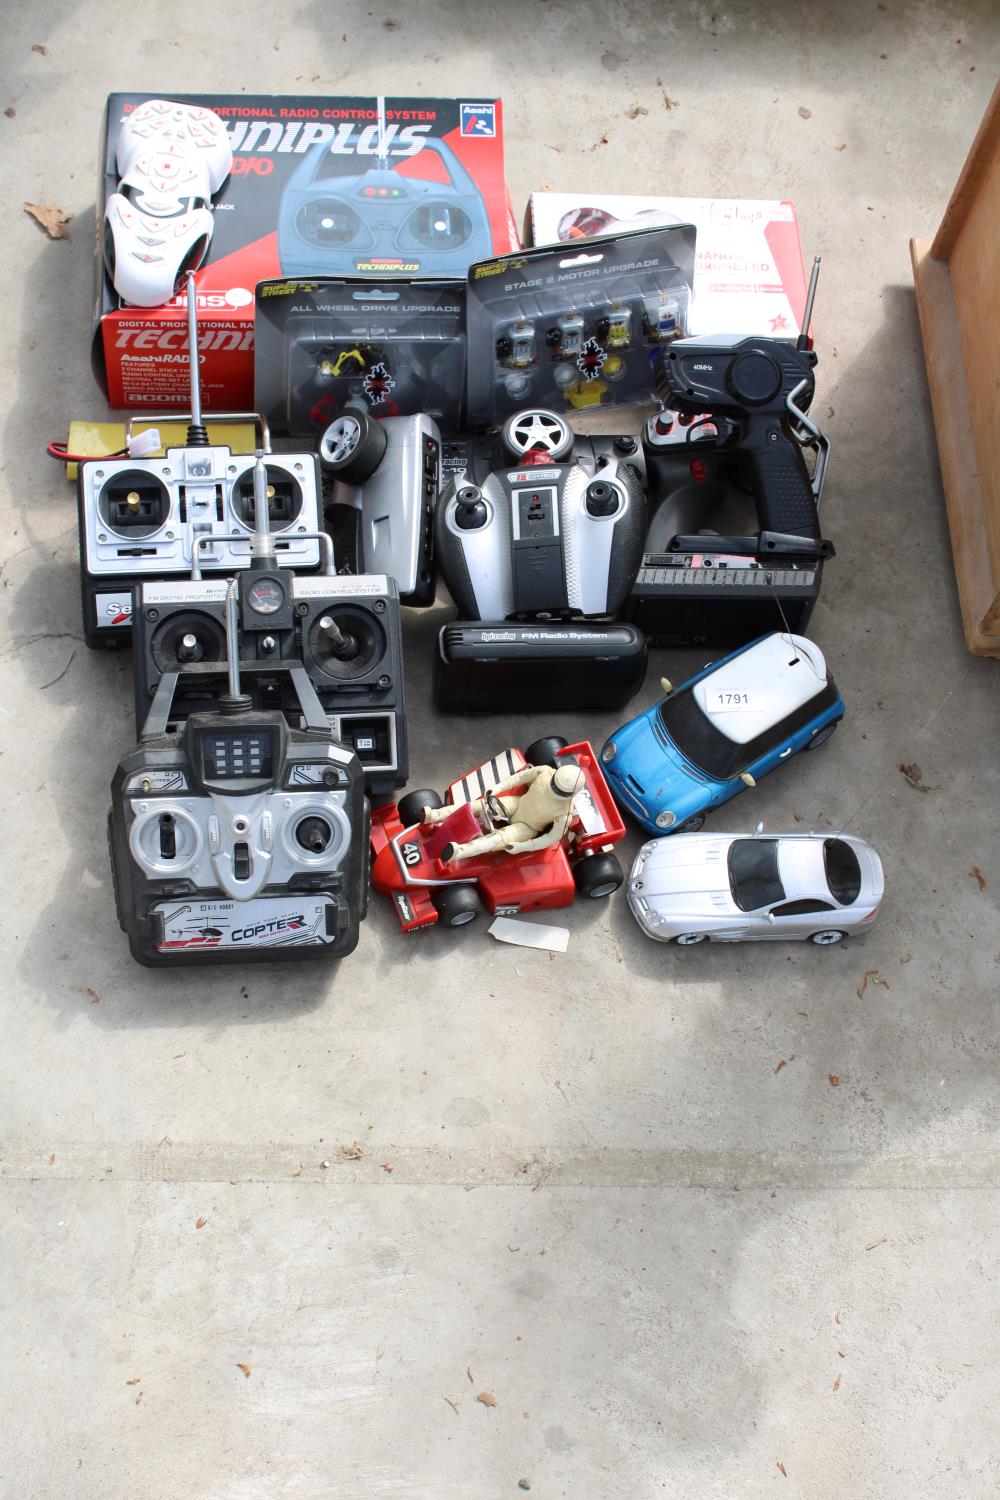 AN ASSORTMENT OF REMOTE CONTROL CARS AND AN ASSORTMENT OF R/C CONTROLLERS